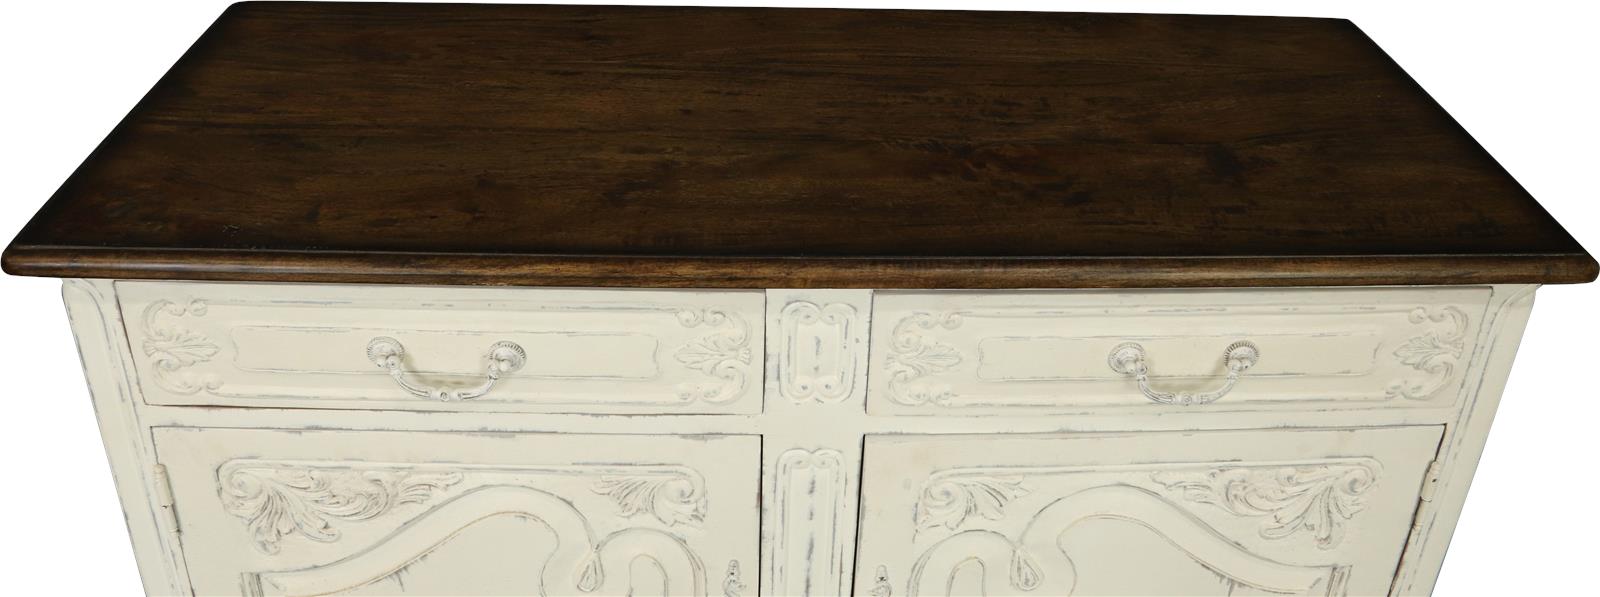 Server Sideboard French Country Carved Antiqued White Rustic Wood Small-Image 3